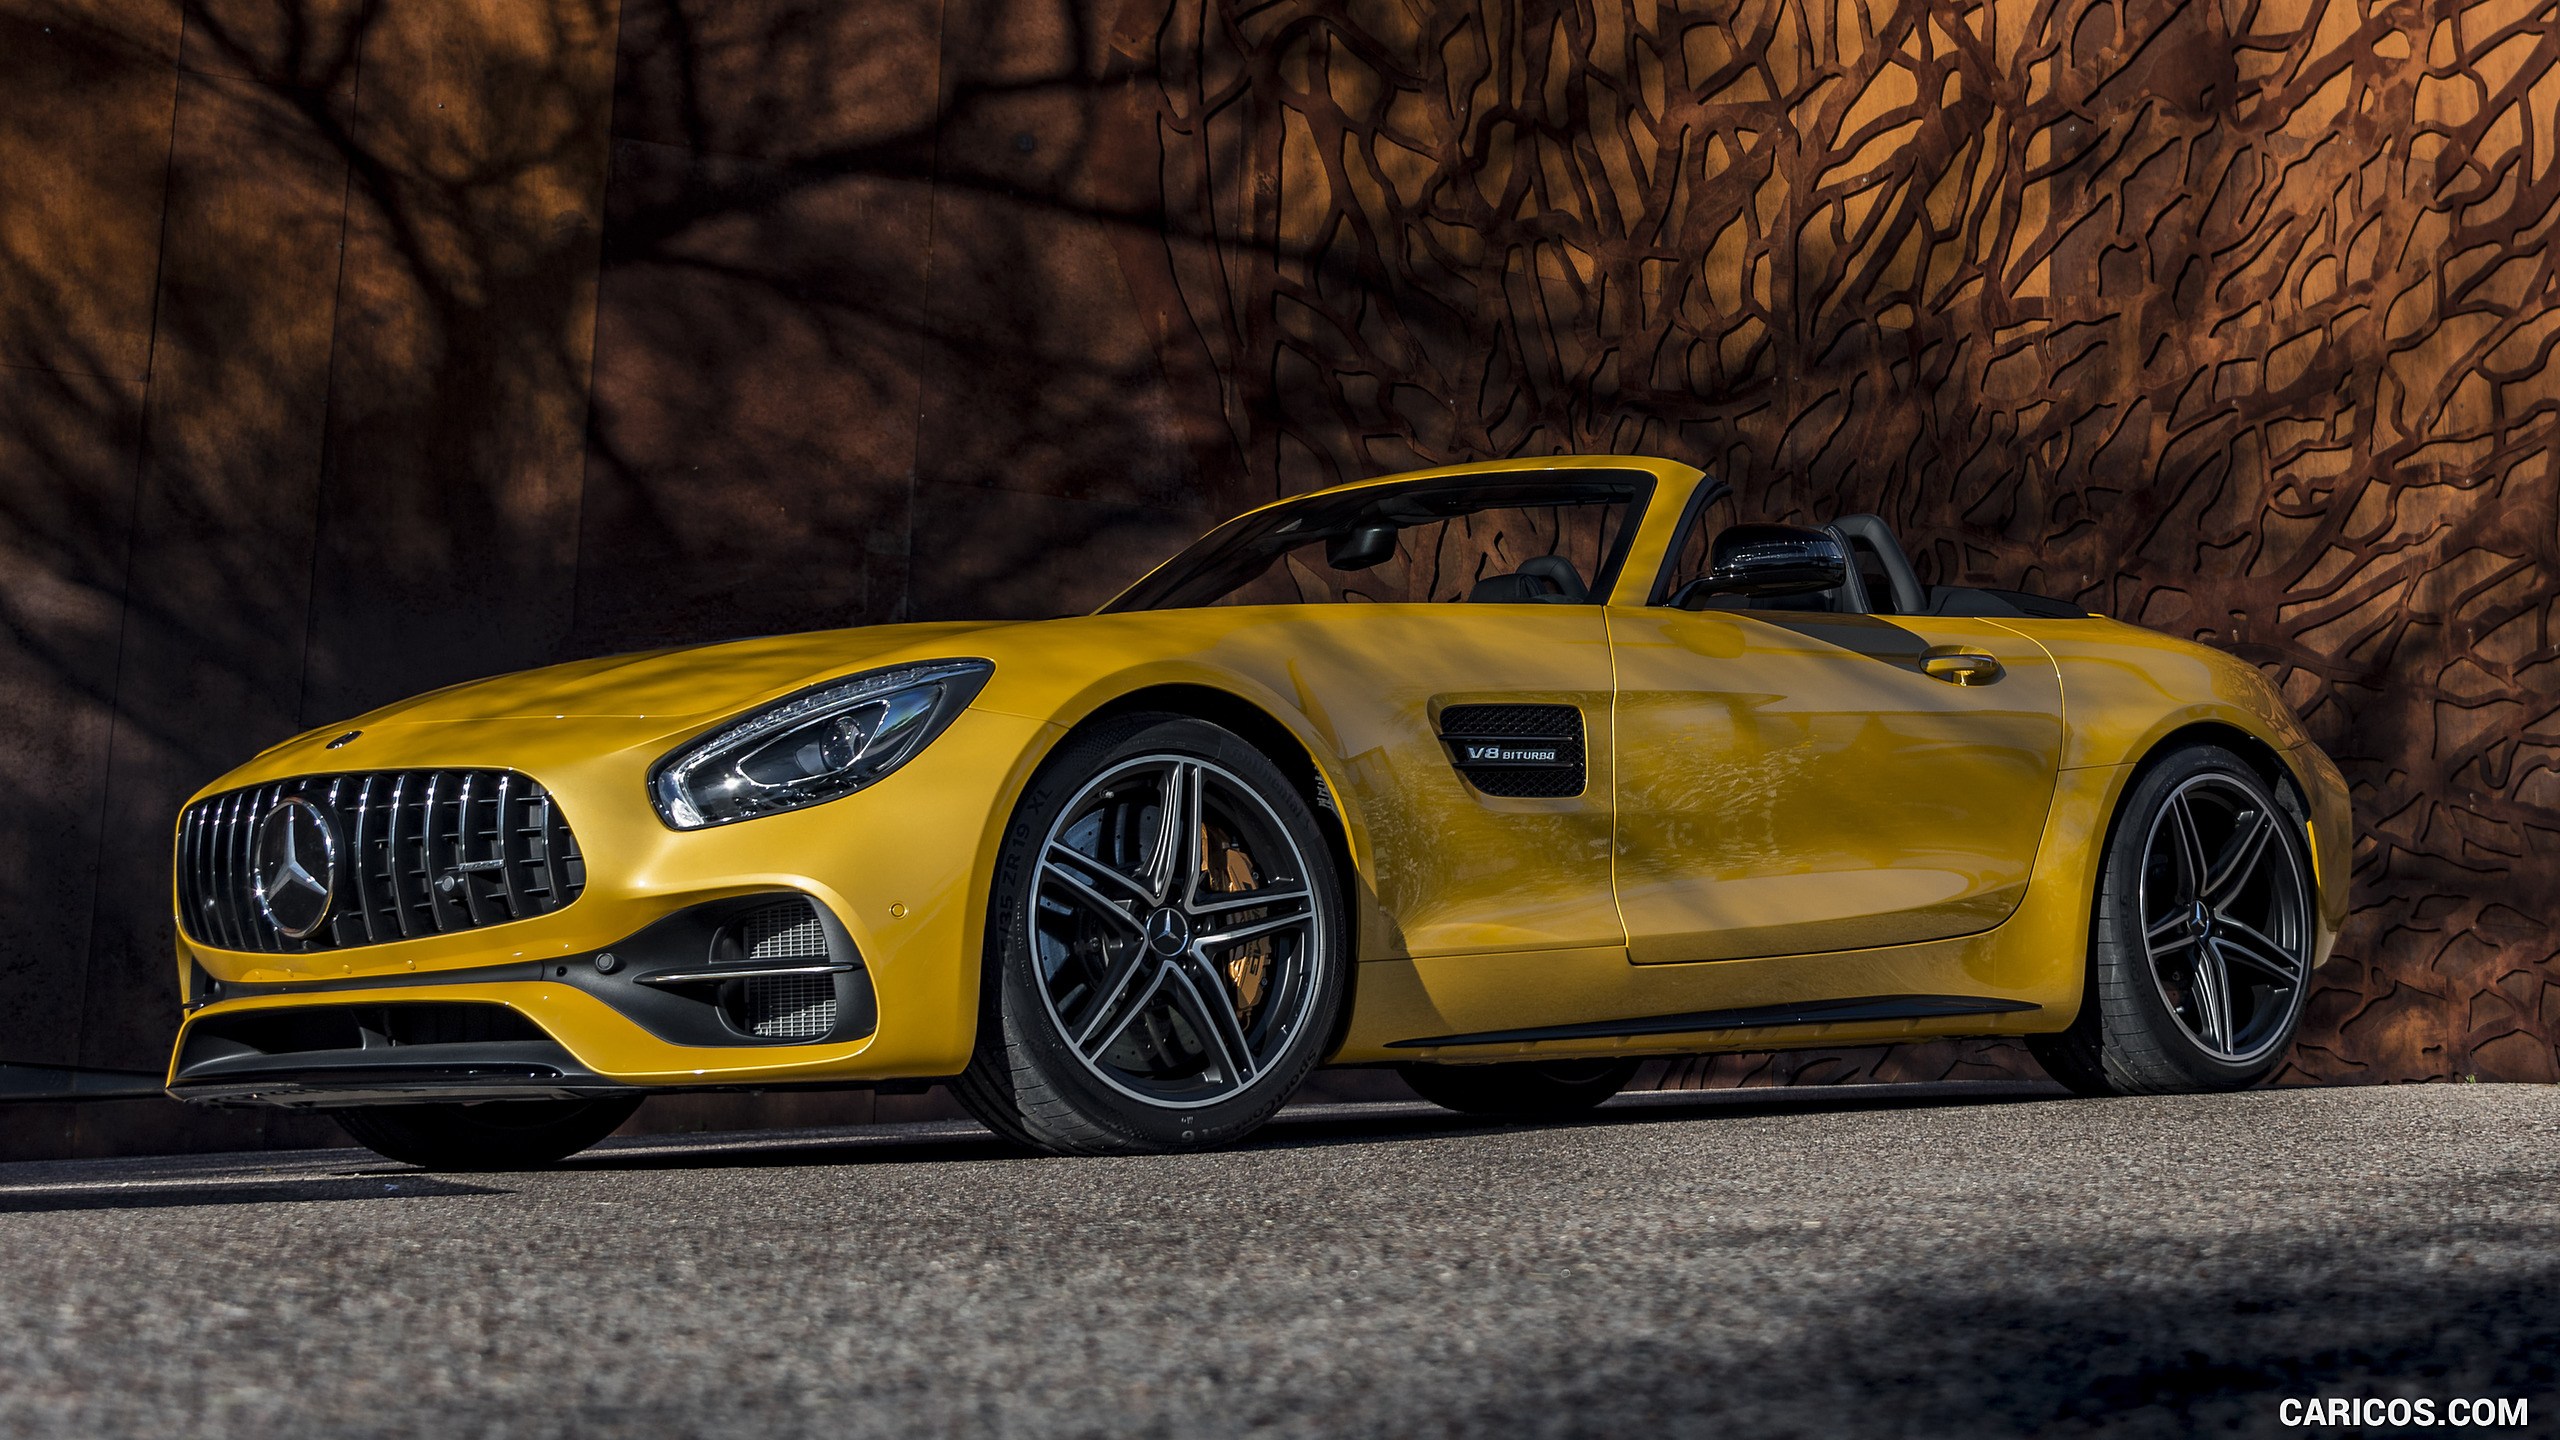 2018 Mercedes-AMG GT C Roadster - Front Three-Quarter, #251 of 350